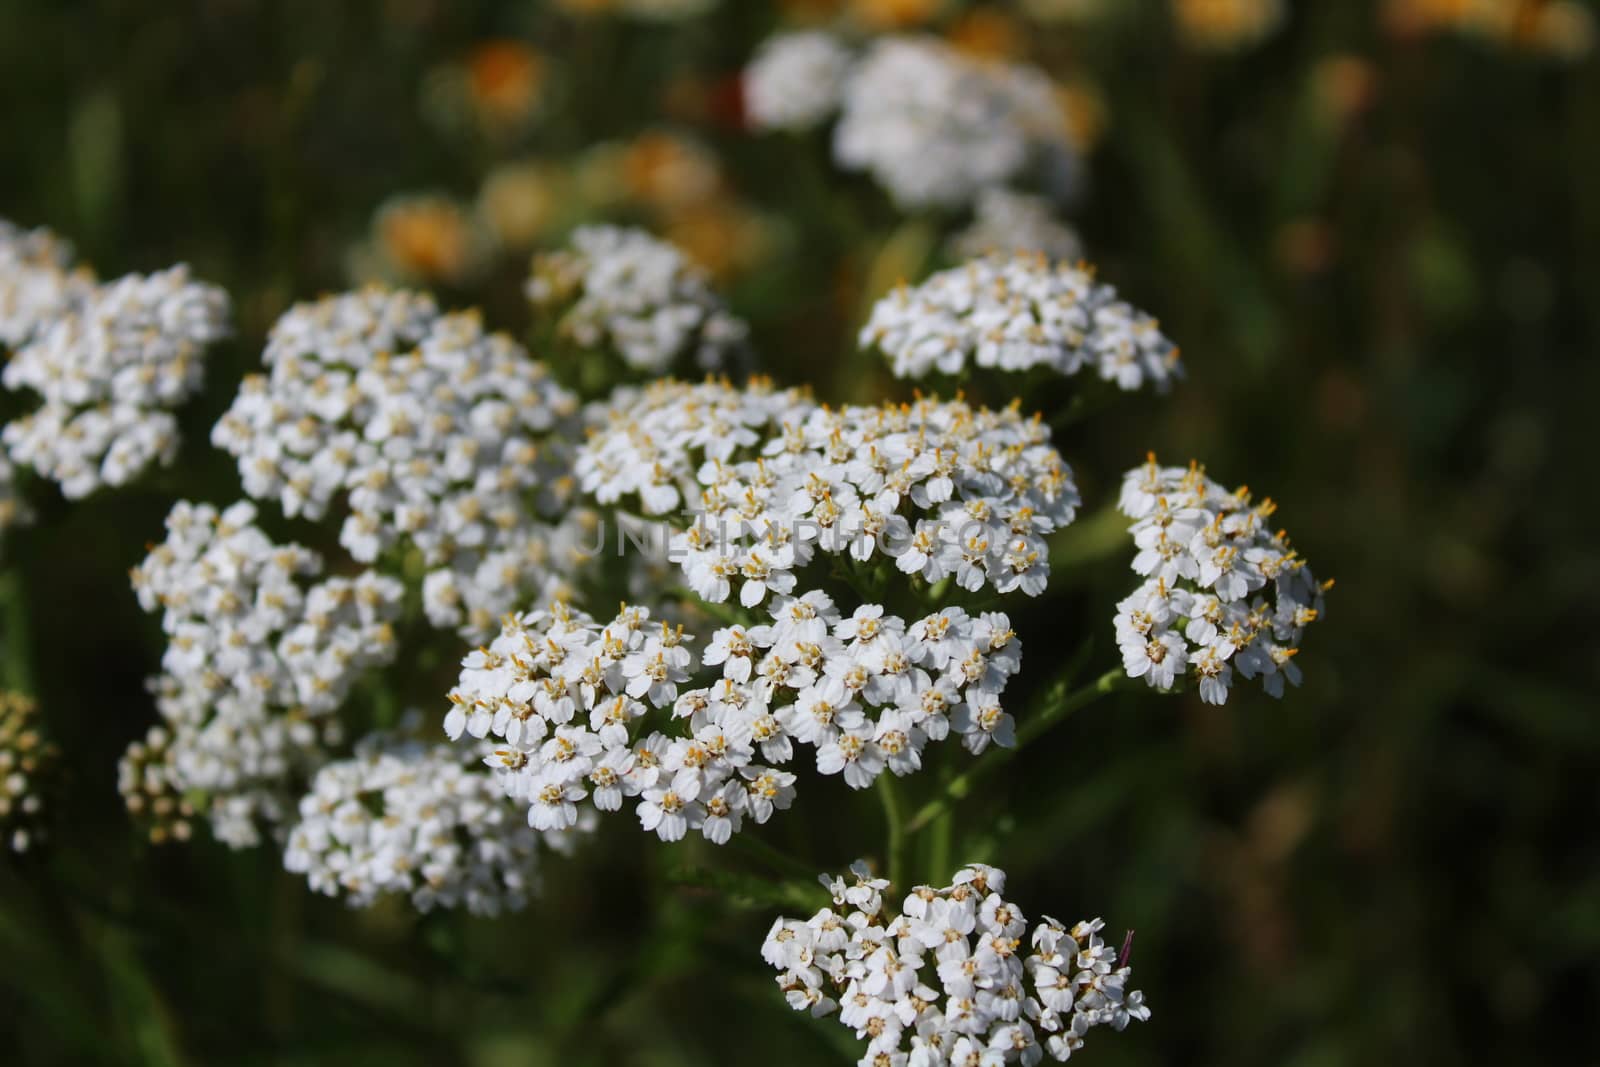 The picture shows blossoming yarrow in the garden